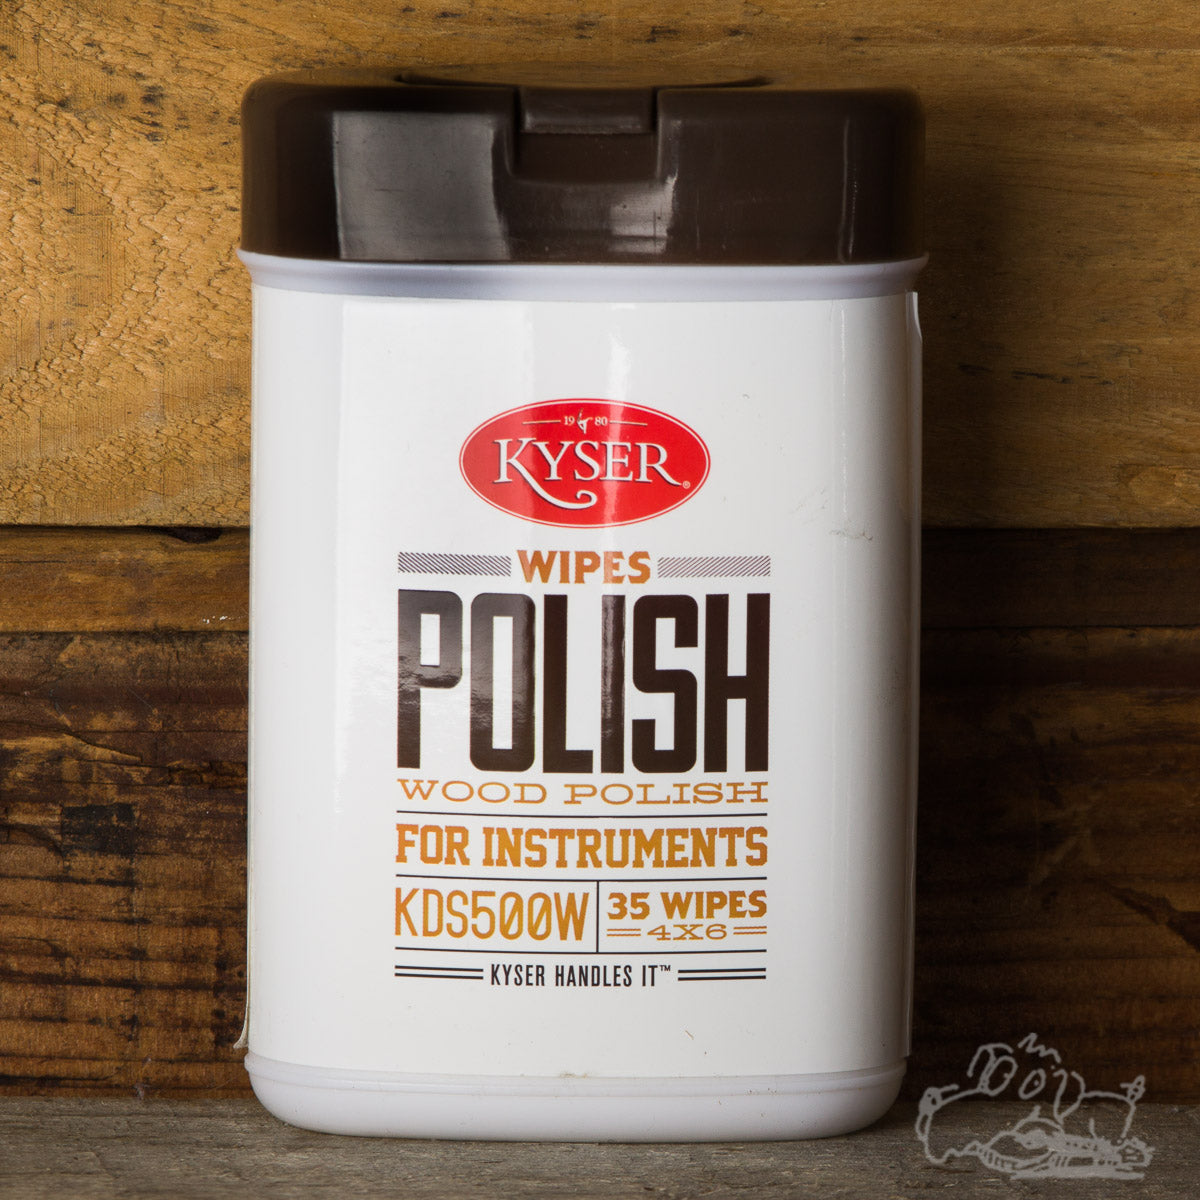 Kyser Wipes Wood Polish for Instruments 4"x6" (35 Wipes)